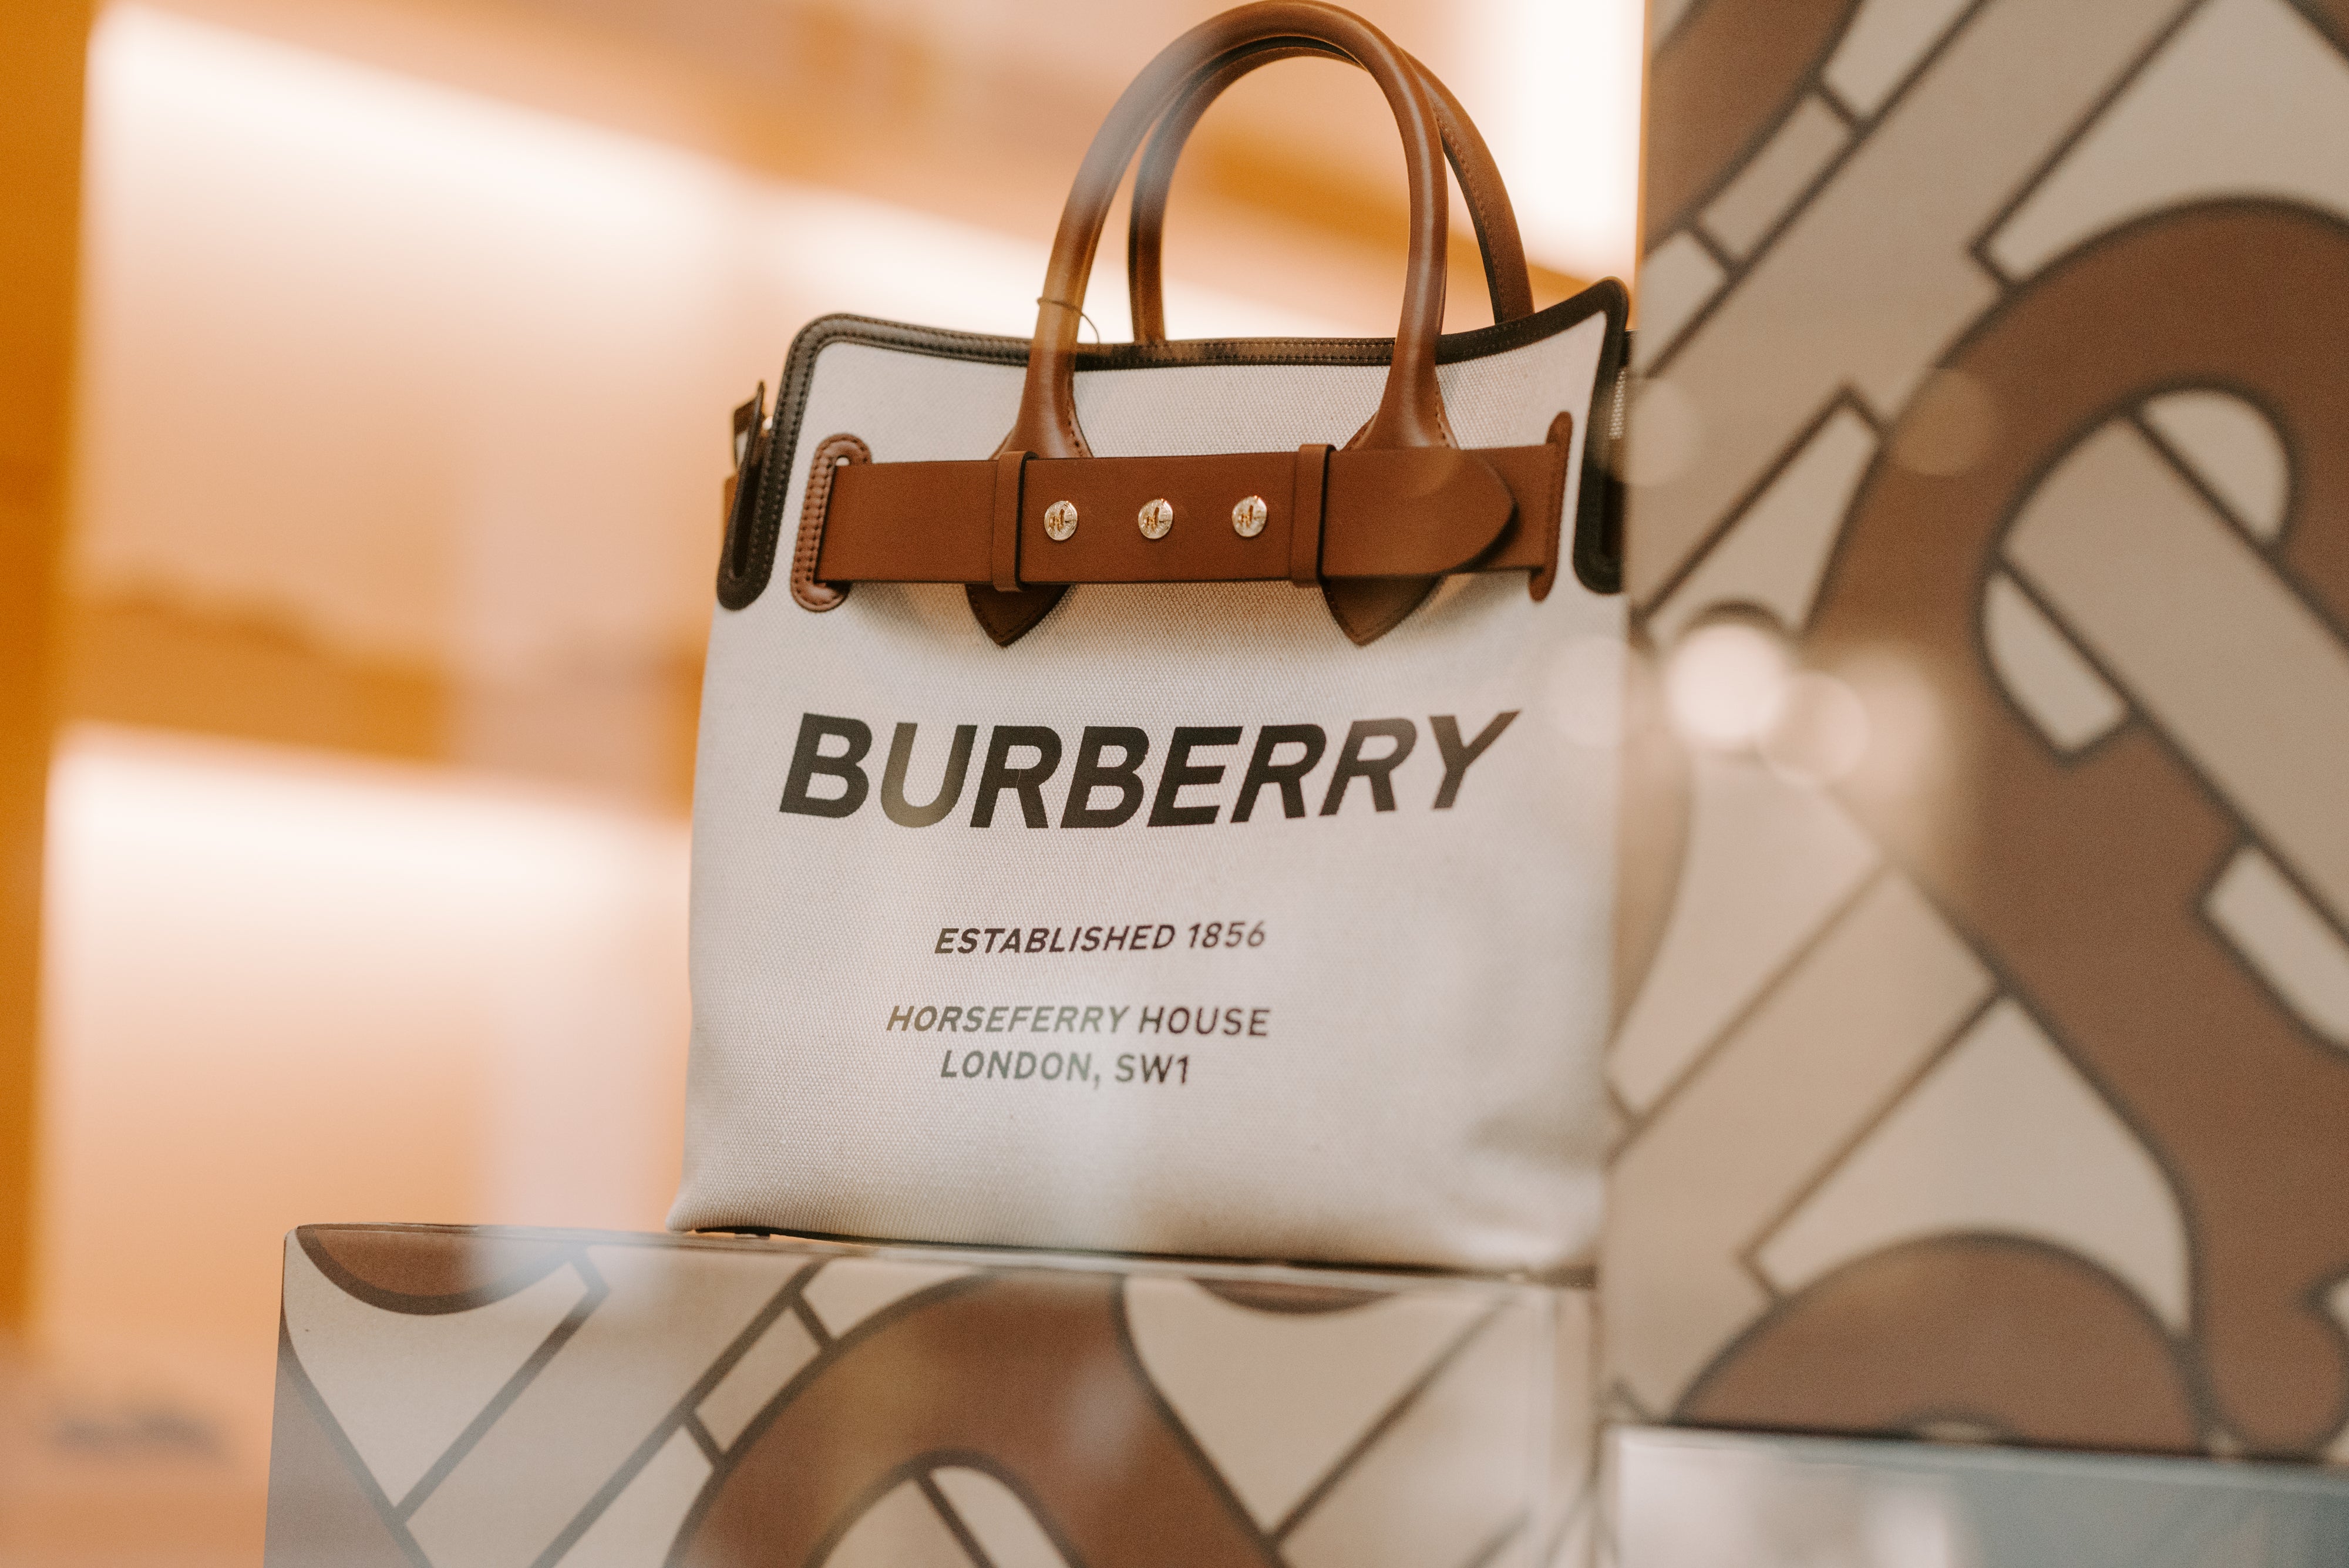 Burberry bags for sale in Evansville, Indiana | Facebook Marketplace |  Facebook